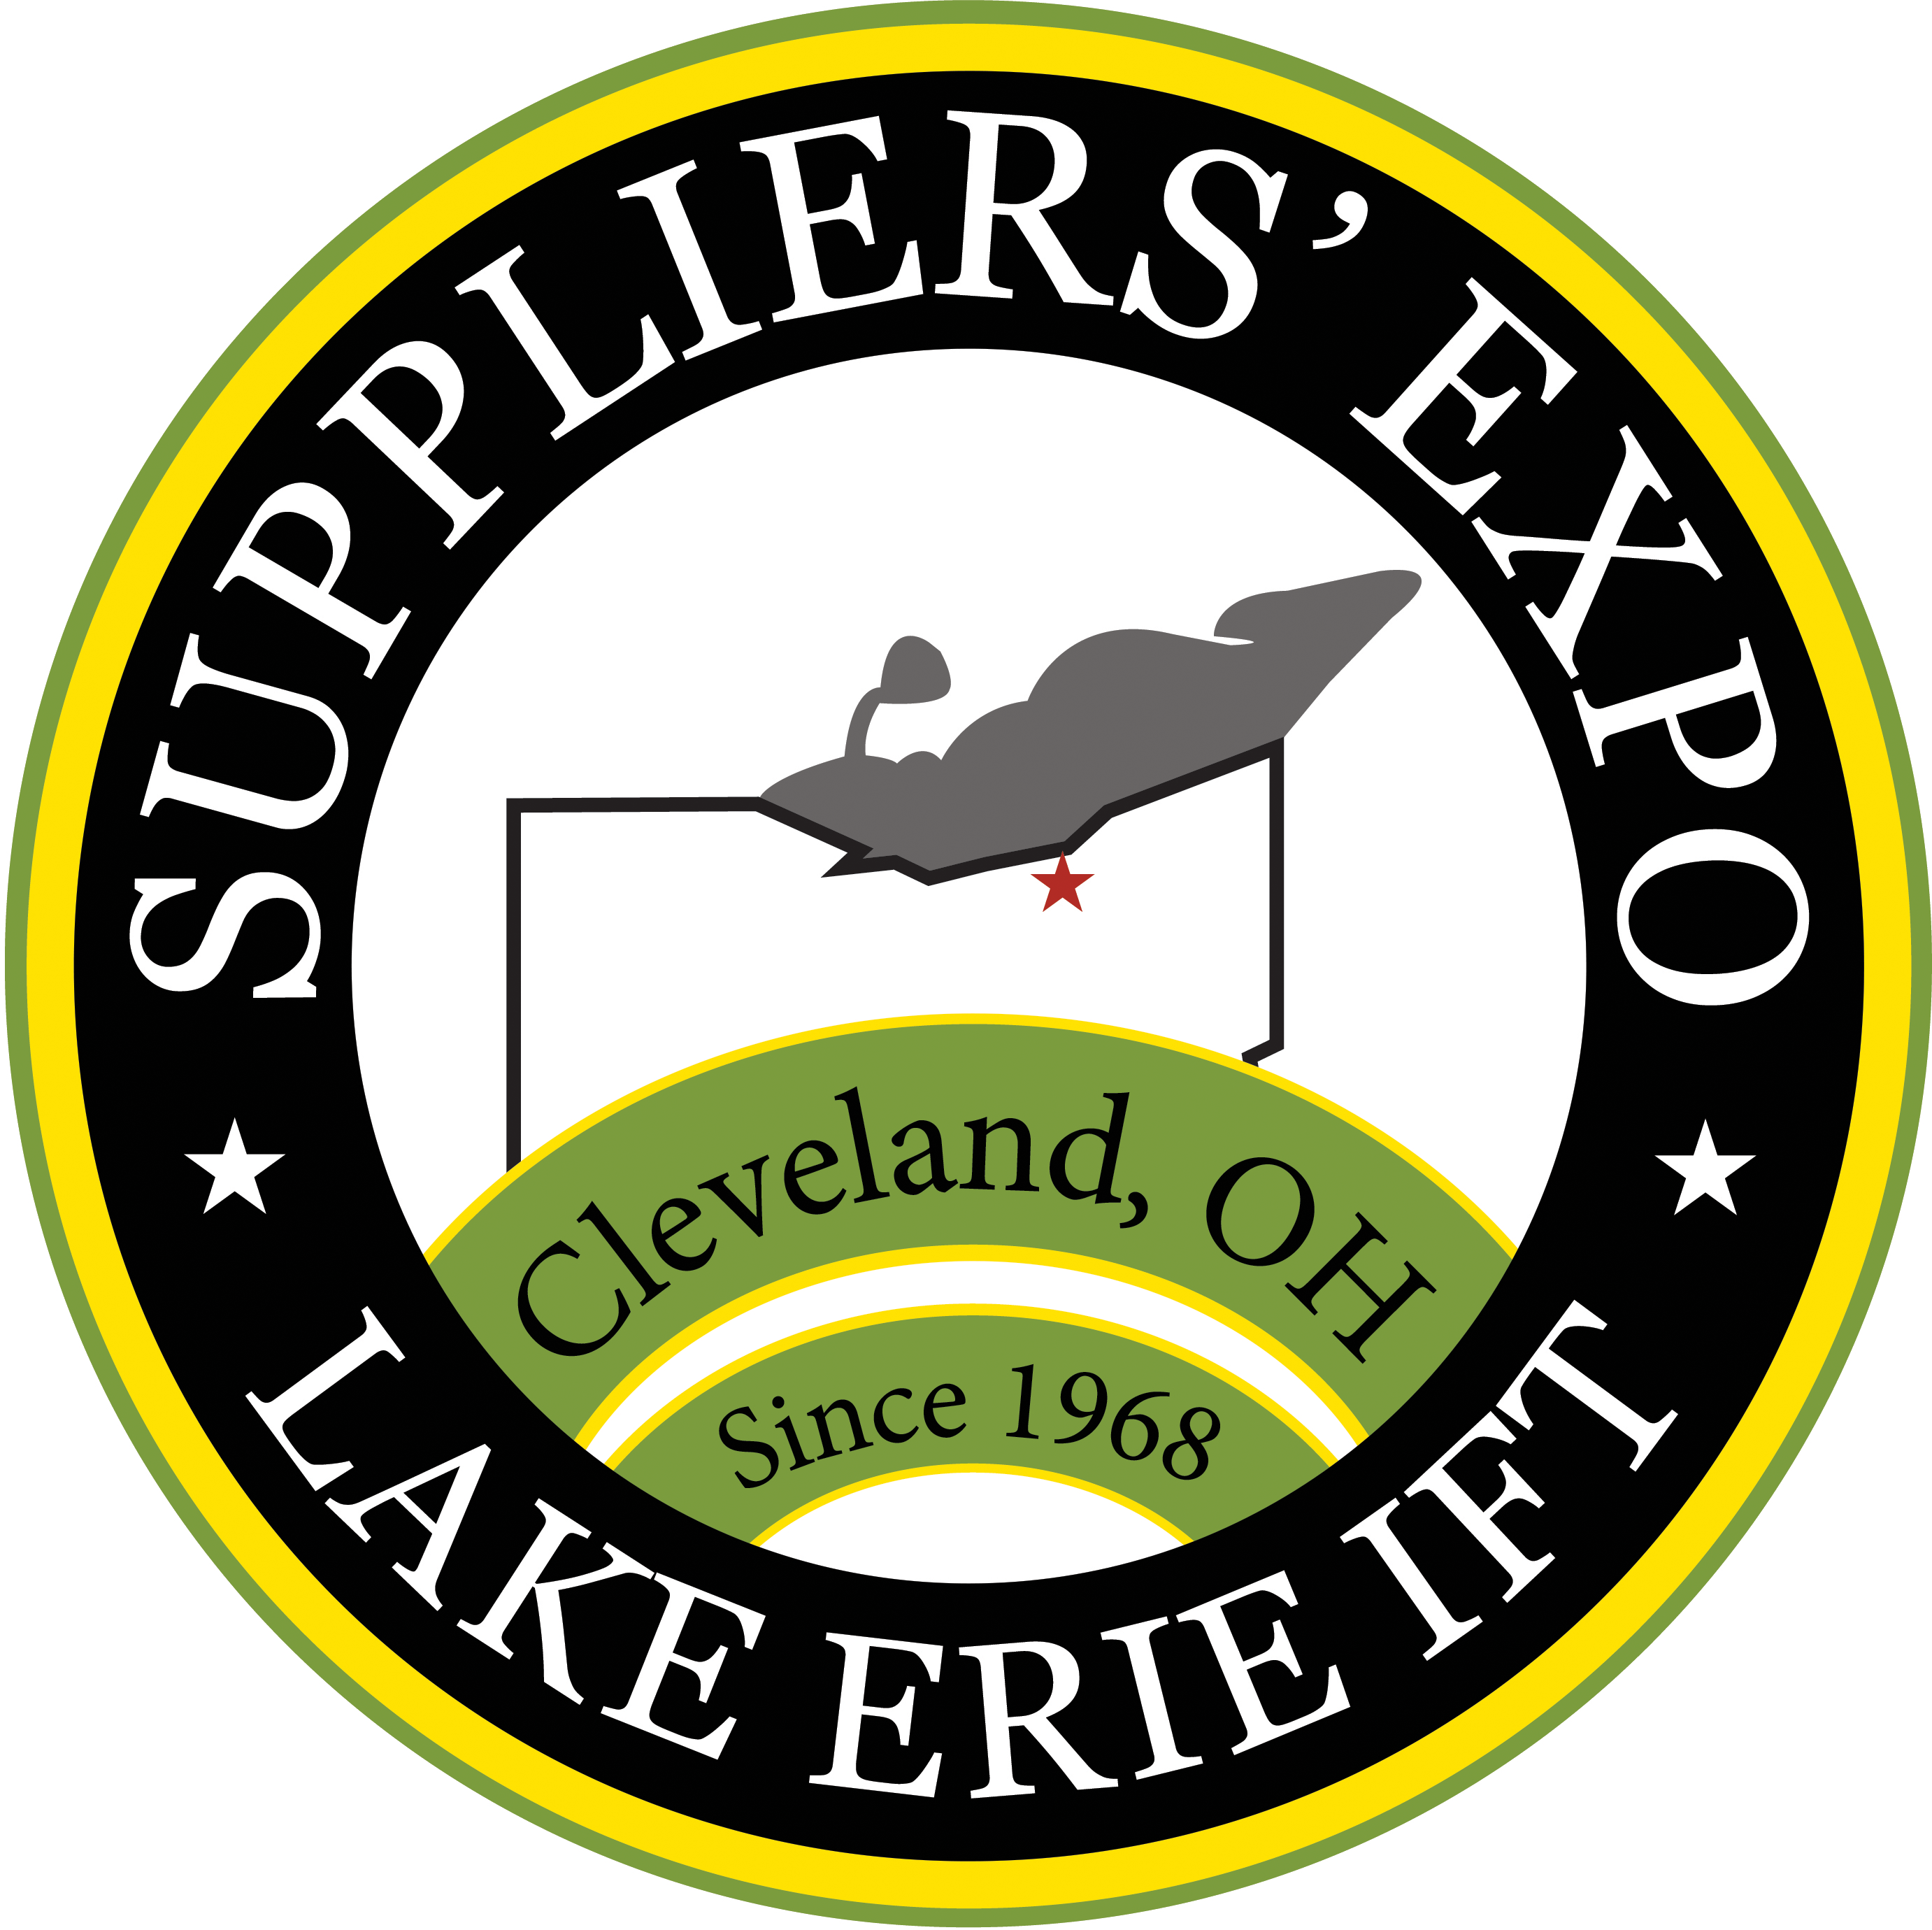 2017 Lake Erie Ift Suppliers Expo - Special Operations Command (2763x2760)